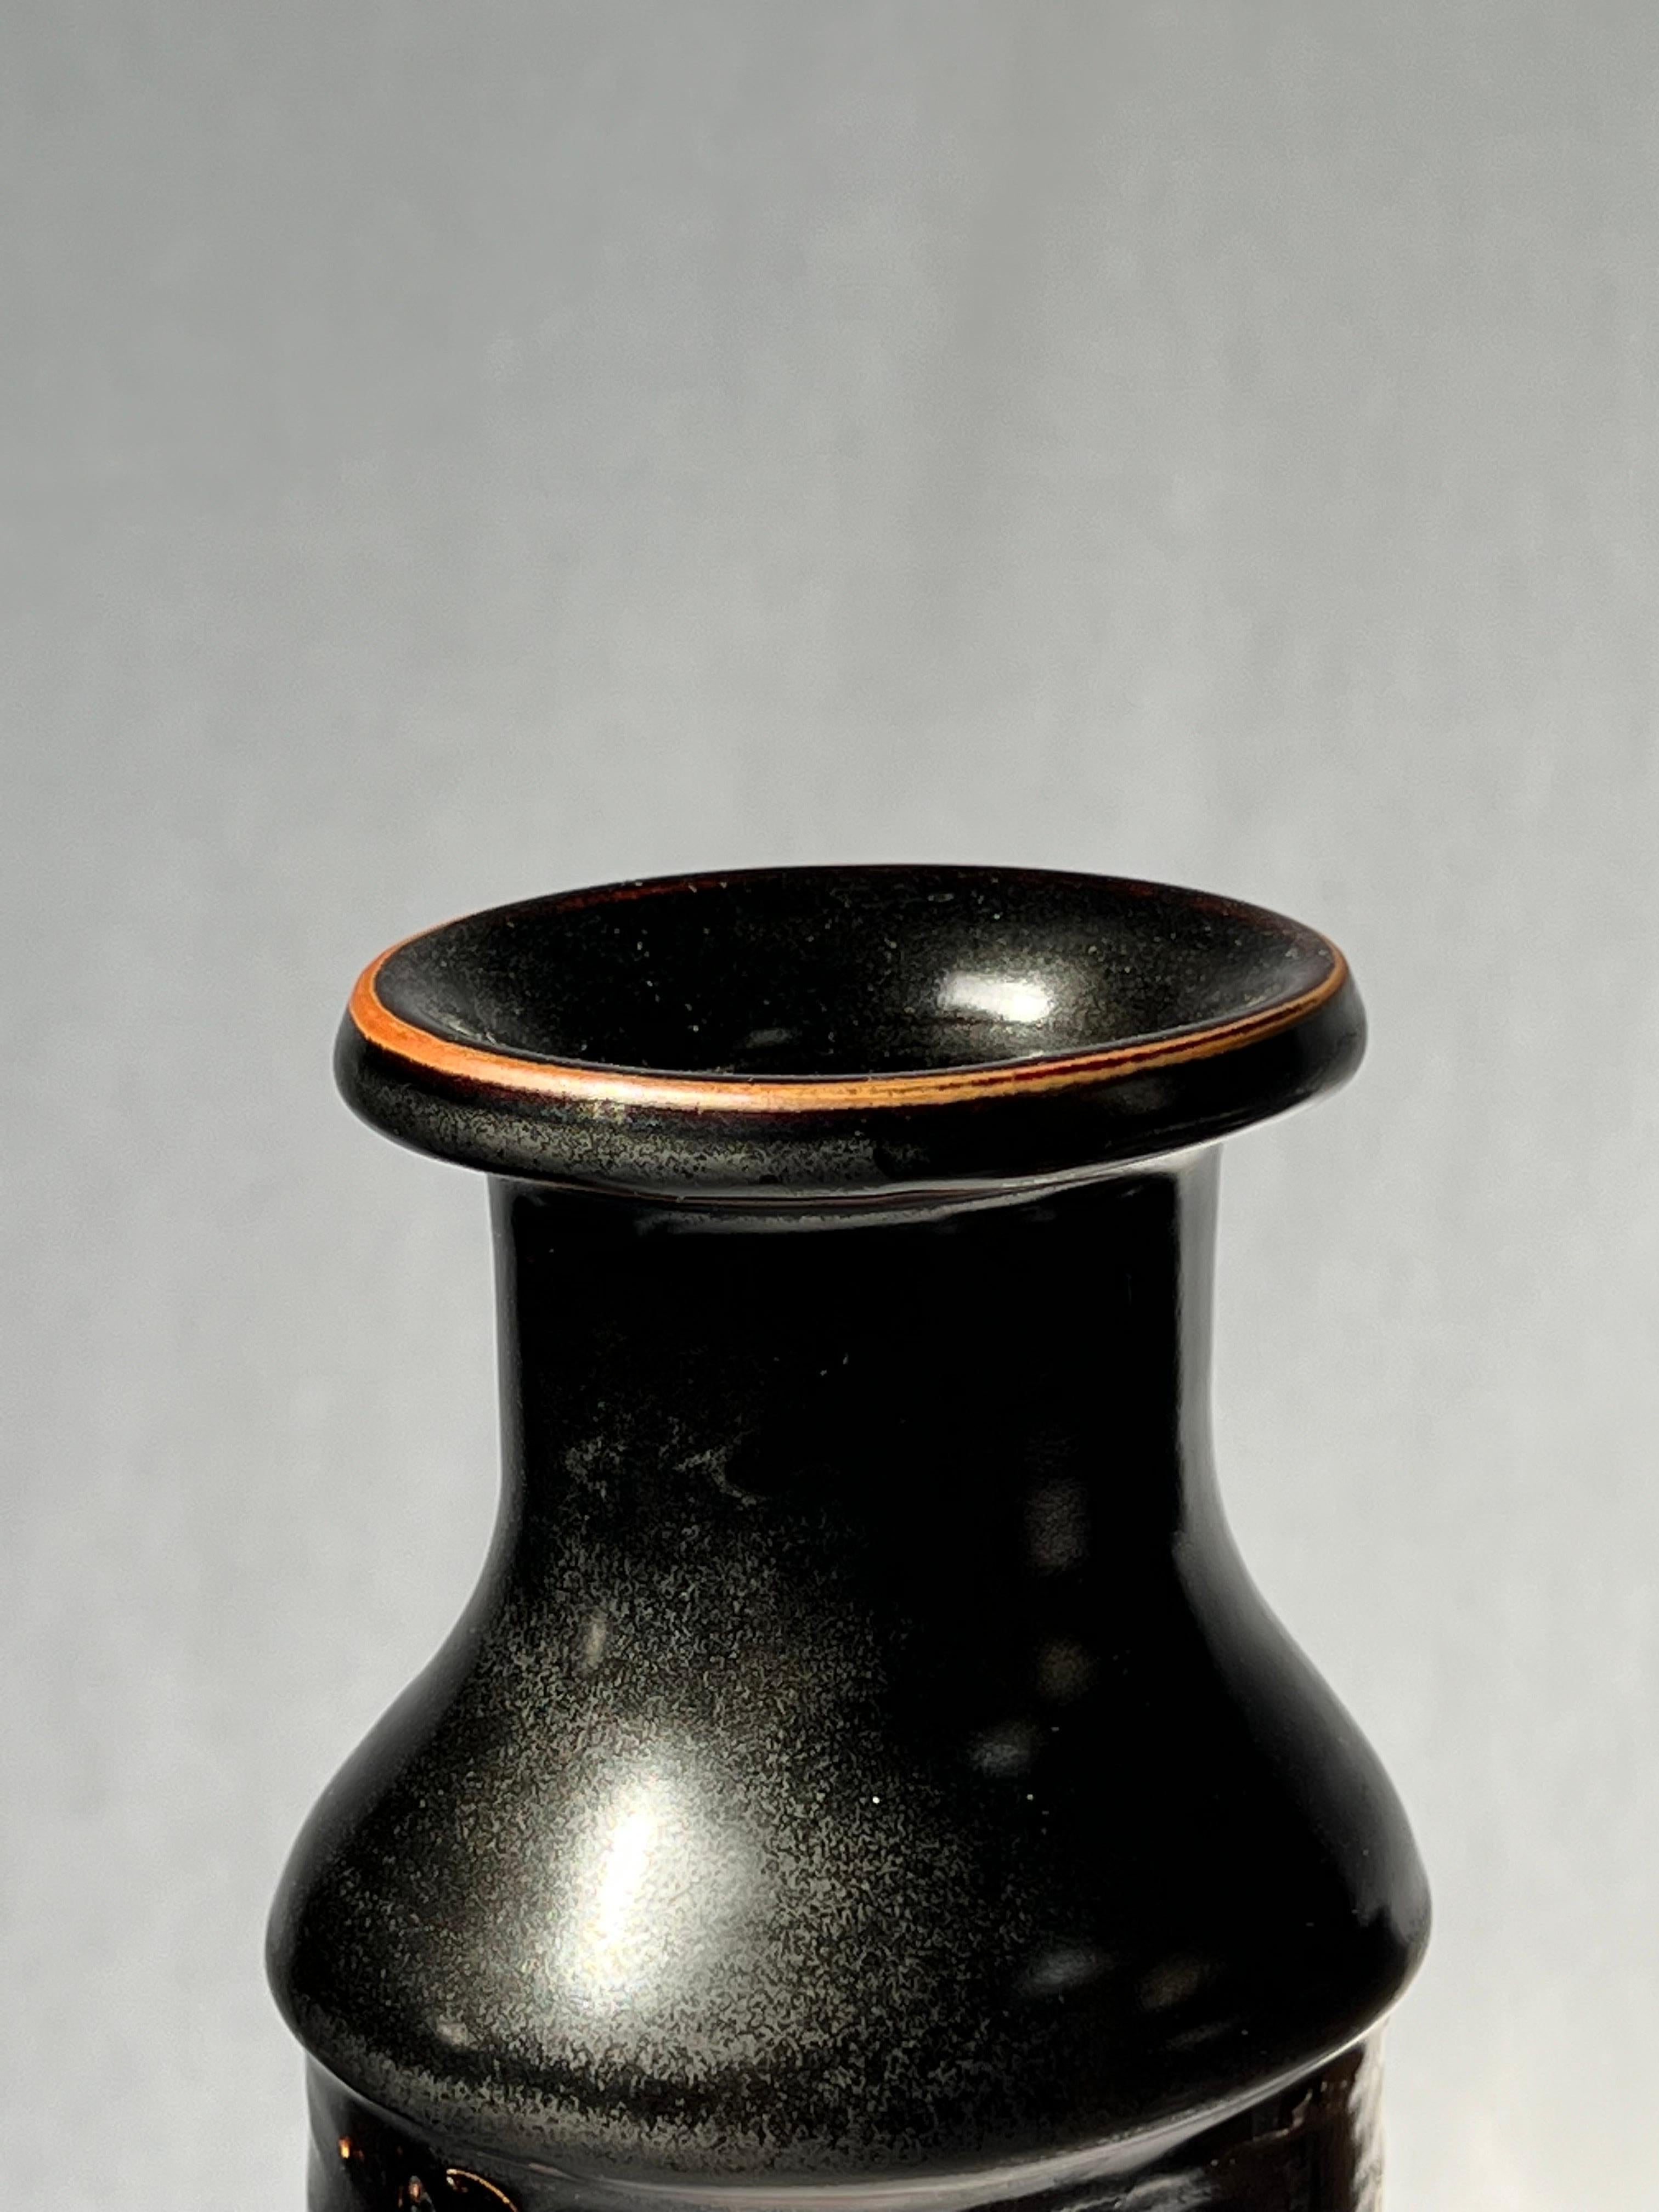 Stig Lindberg Unique Vase in black Glaze Tenmoku Made by Hand Sweden 1978 In Excellent Condition For Sale In Forest, BE